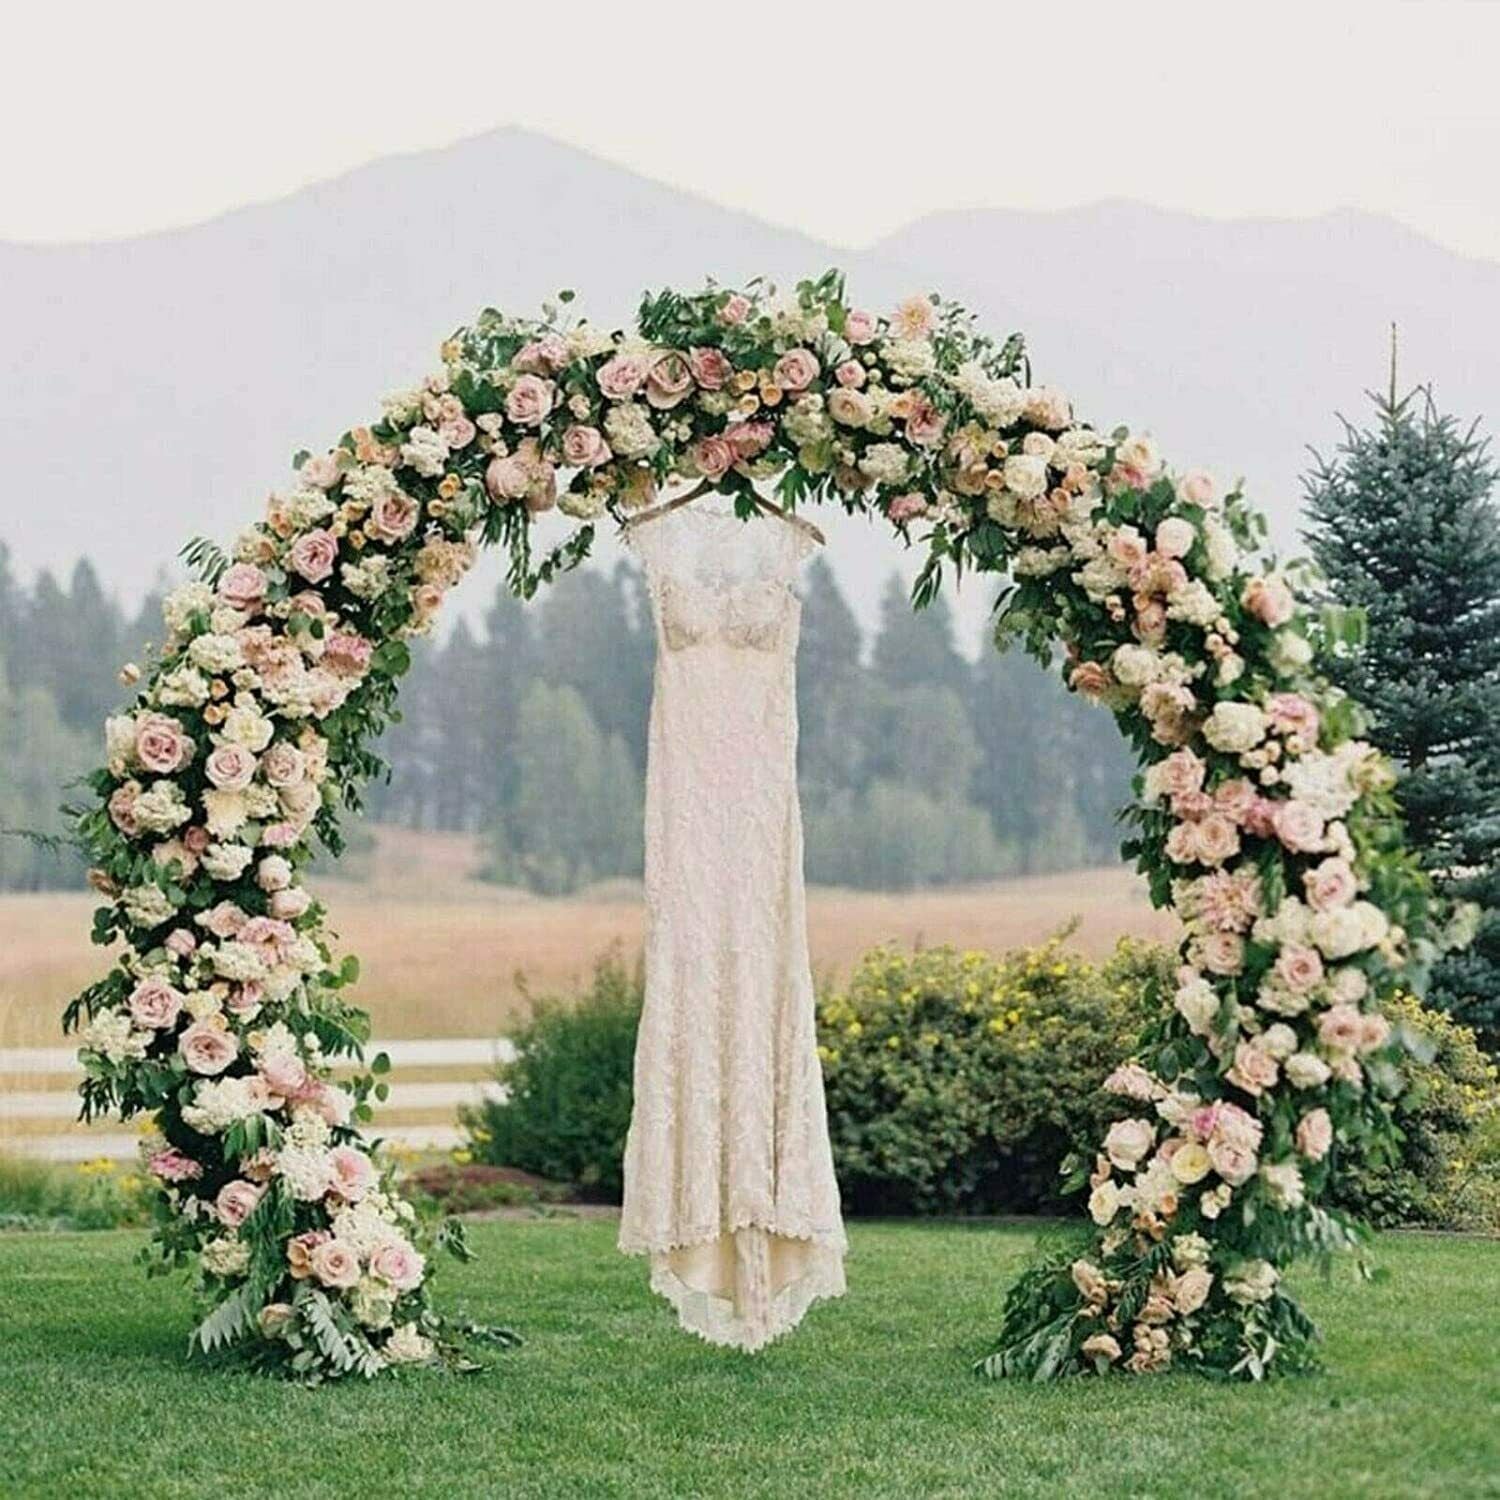 FETCOI Round Arch Backdrop, 5Ft Metal Wedding Ring Frame Decoration Flower  Display Stand Party for Wedding Birthday Christmas Eve DIY Decoration -  Walmart.com